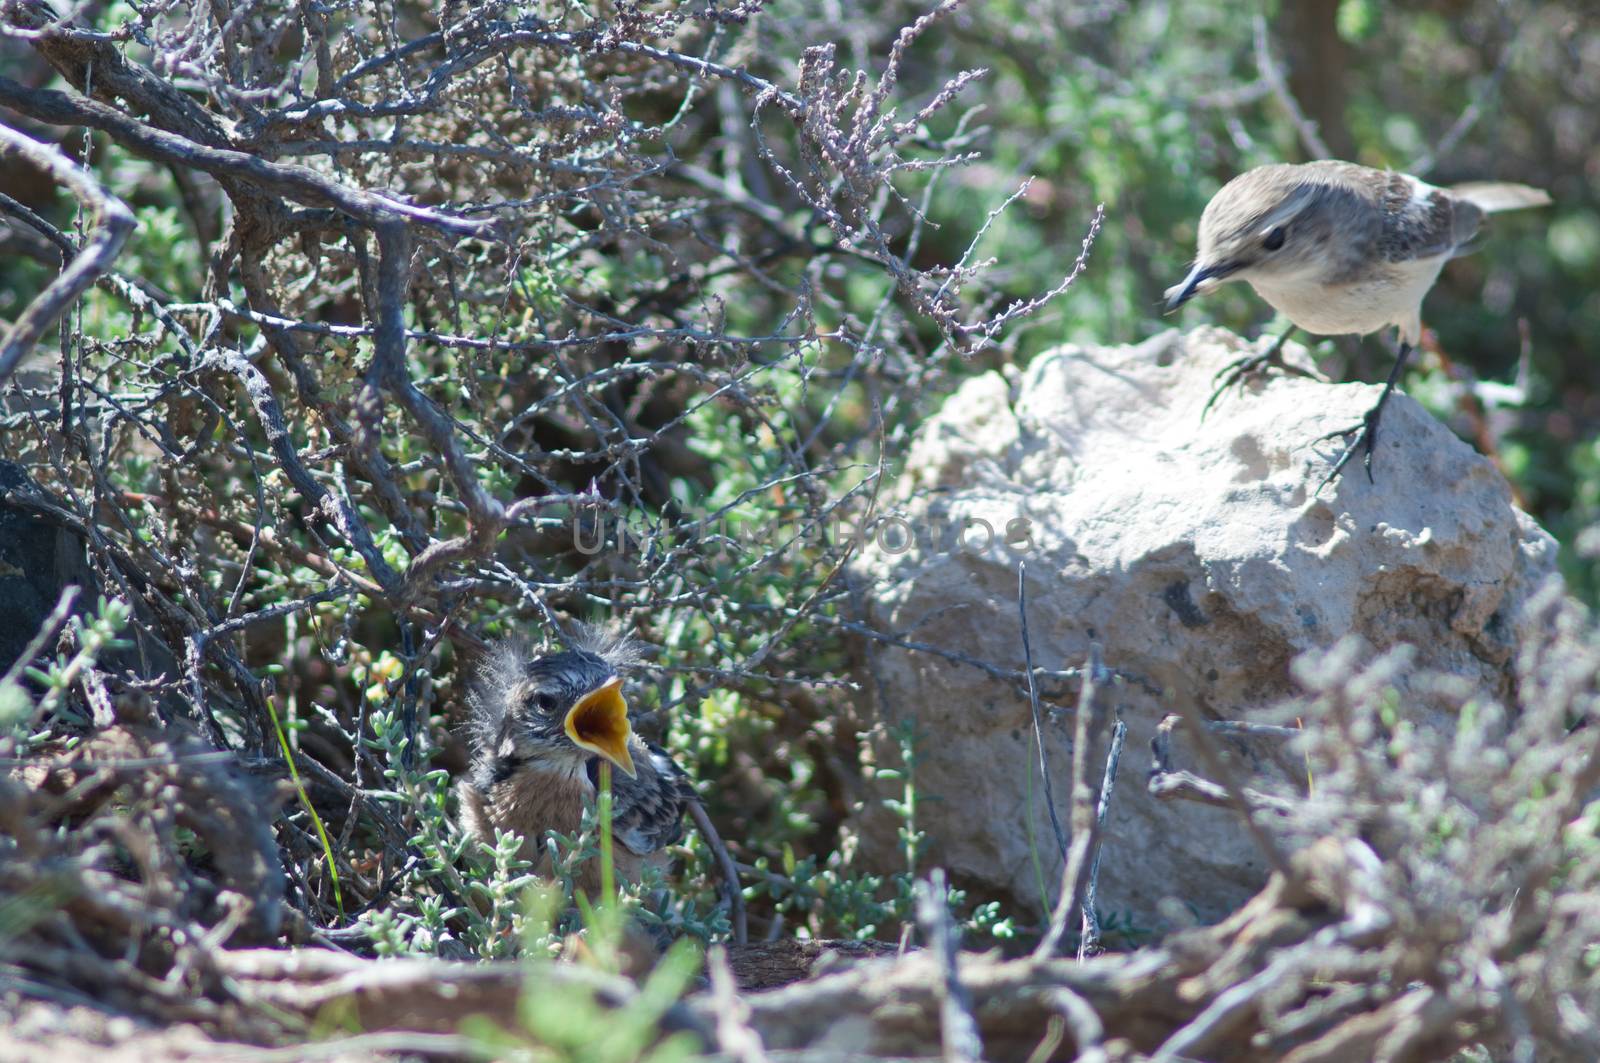 Canary Islands stonechats (Saxicola dacotiae). Female with food to one of its chicks. Esquinzo ravine. La Oliva. Fuerteventura. Canary Islands. Spain.